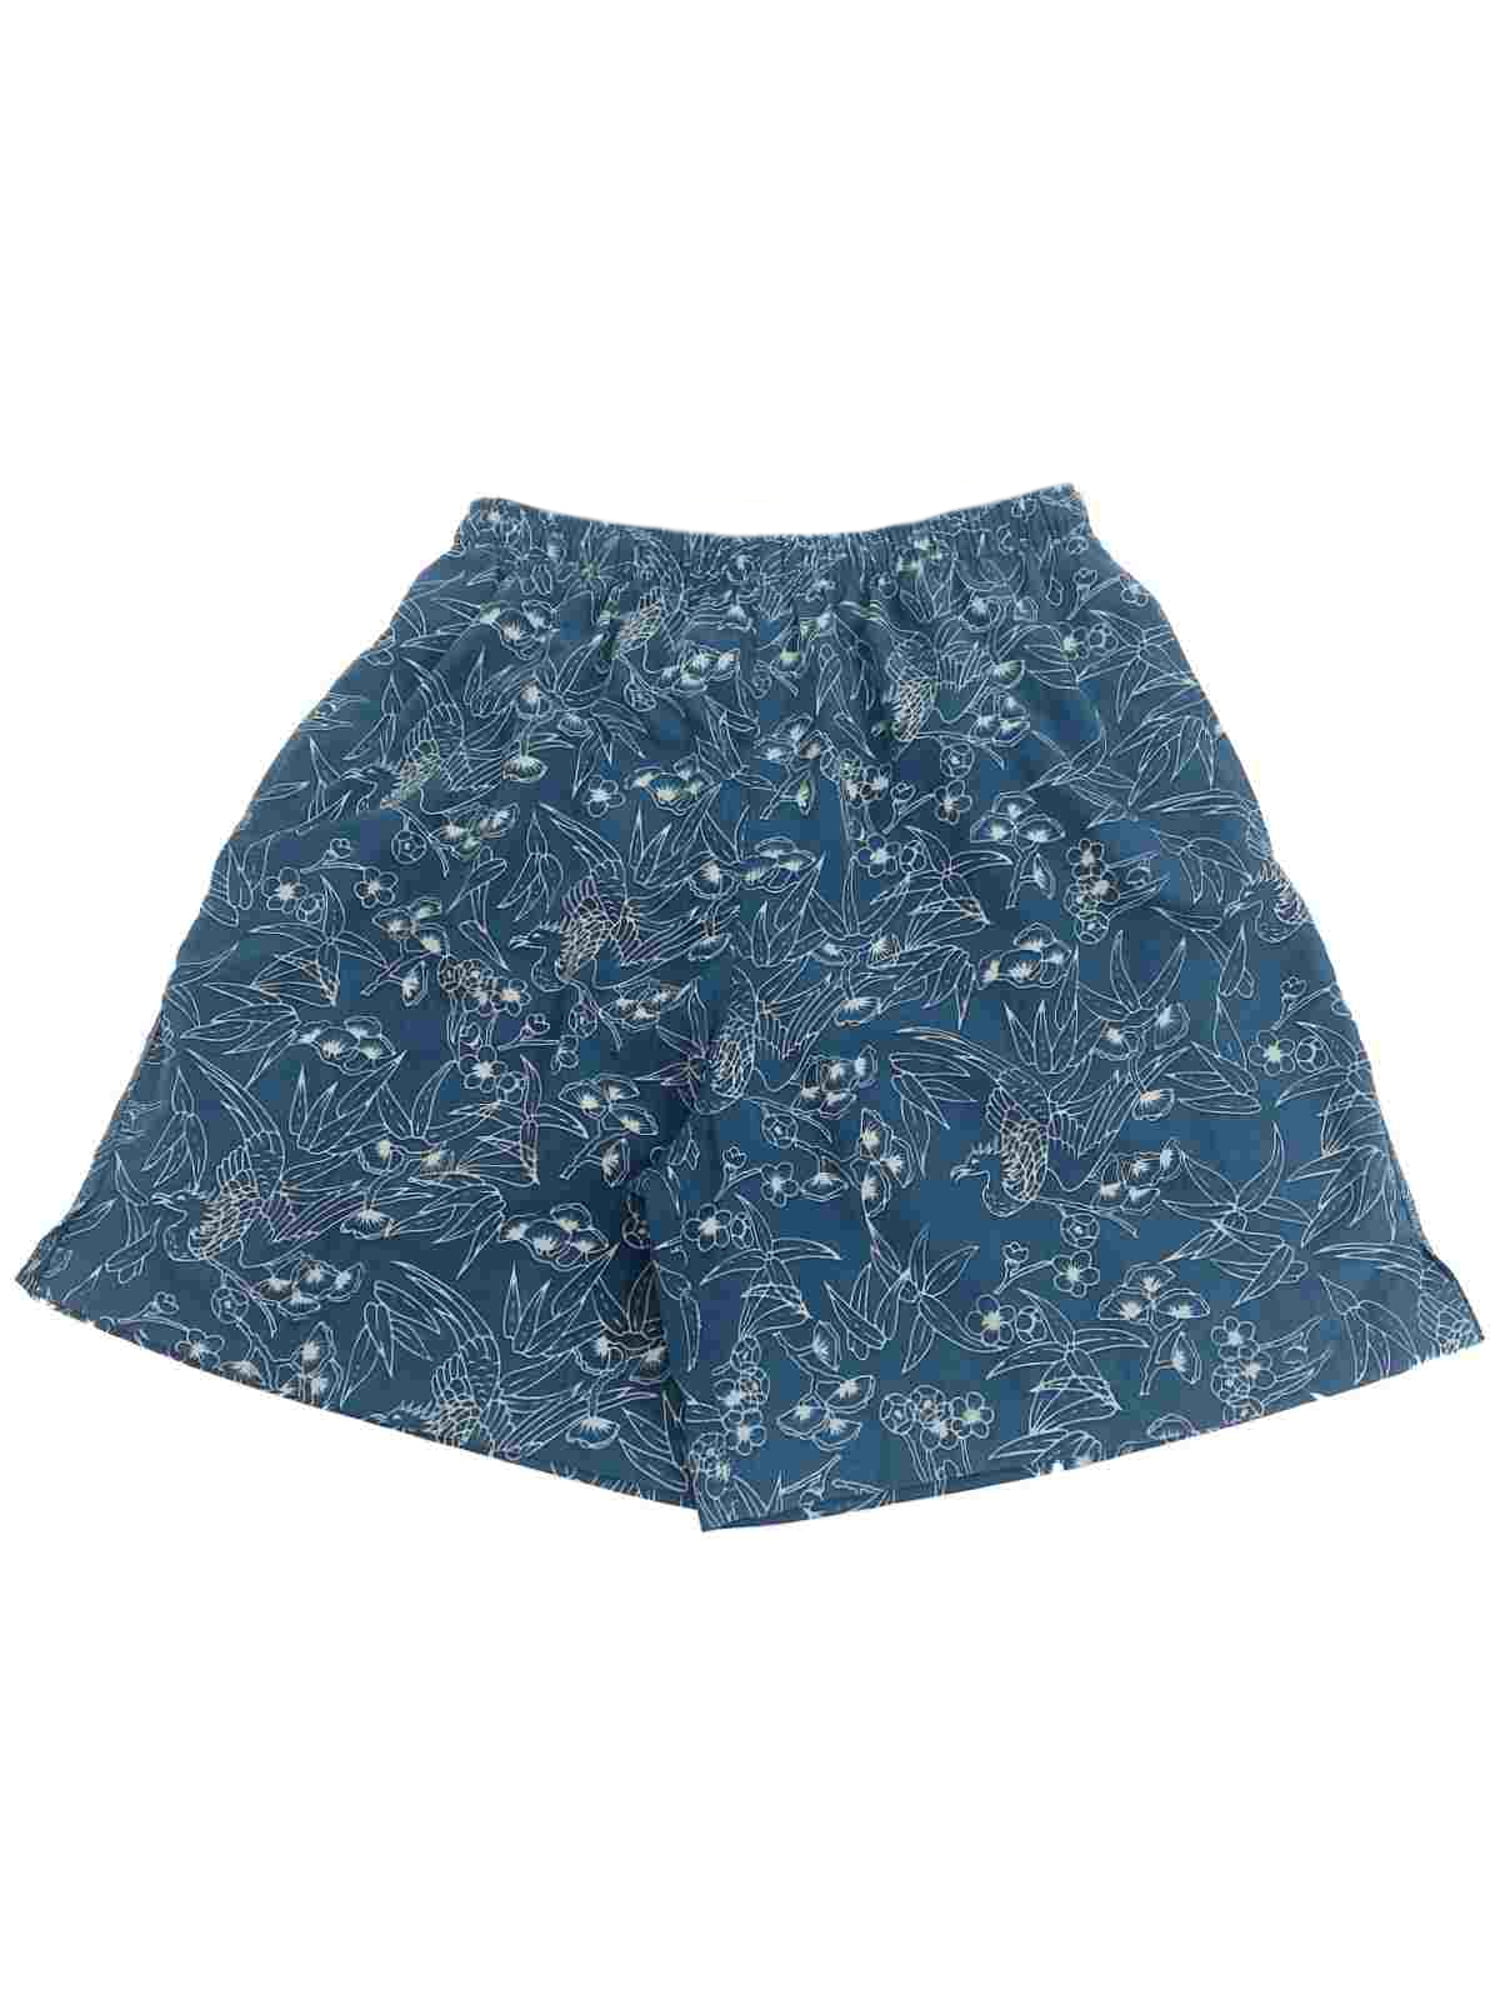 Alice in Chains Black Gives Way to Blue Mans Summer Beach Shorts Surfing Pants